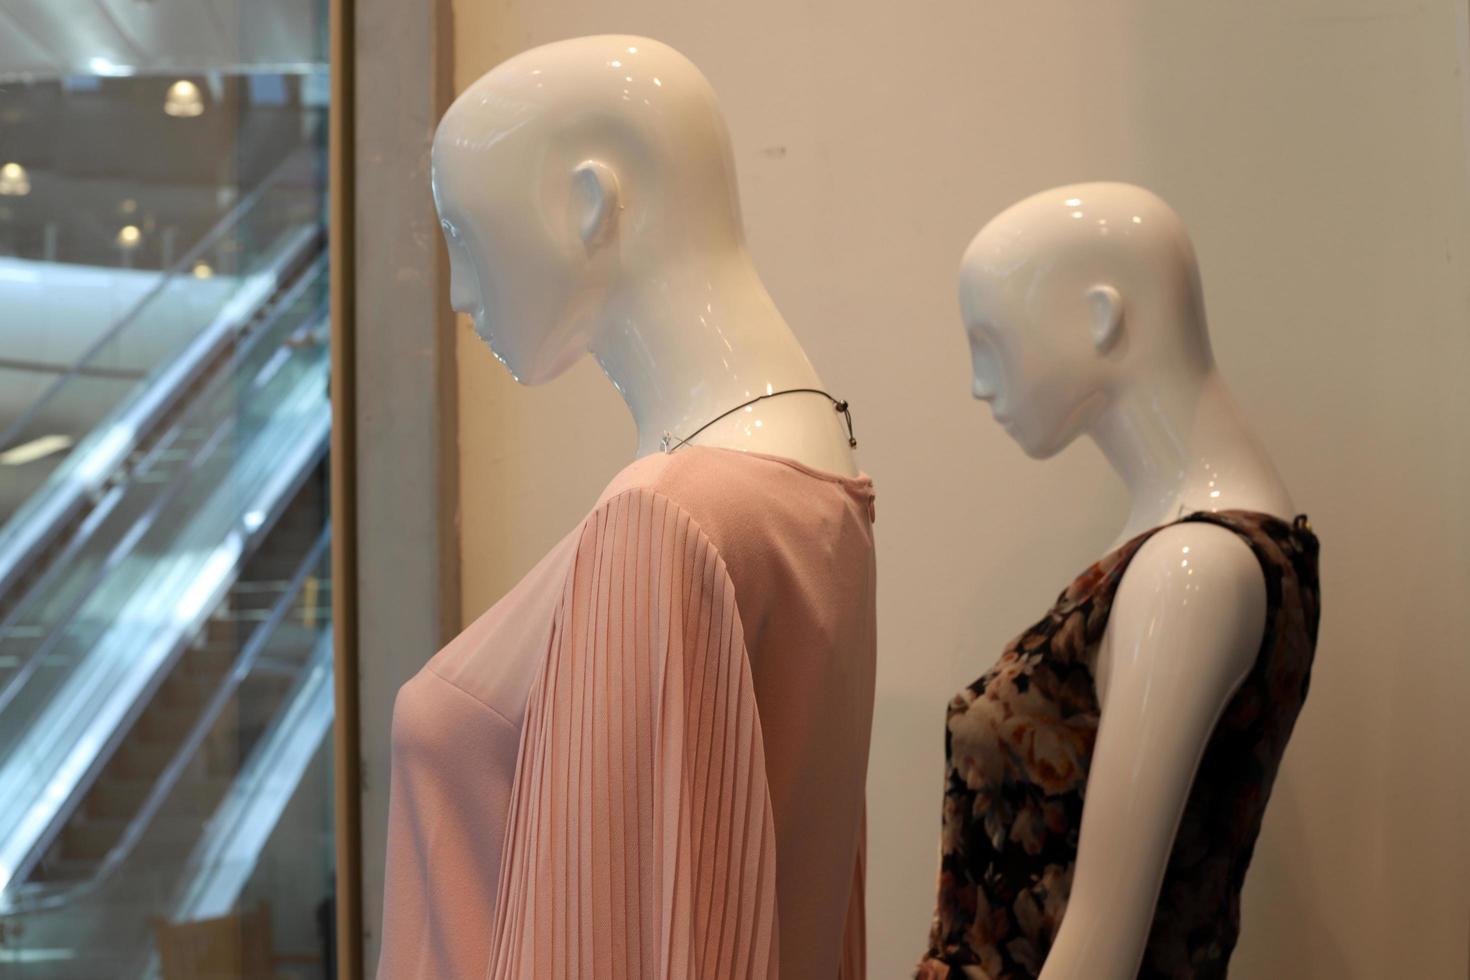 Tel Aviv Israel March 15, 2020. A mannequin is on display in a large store. photo